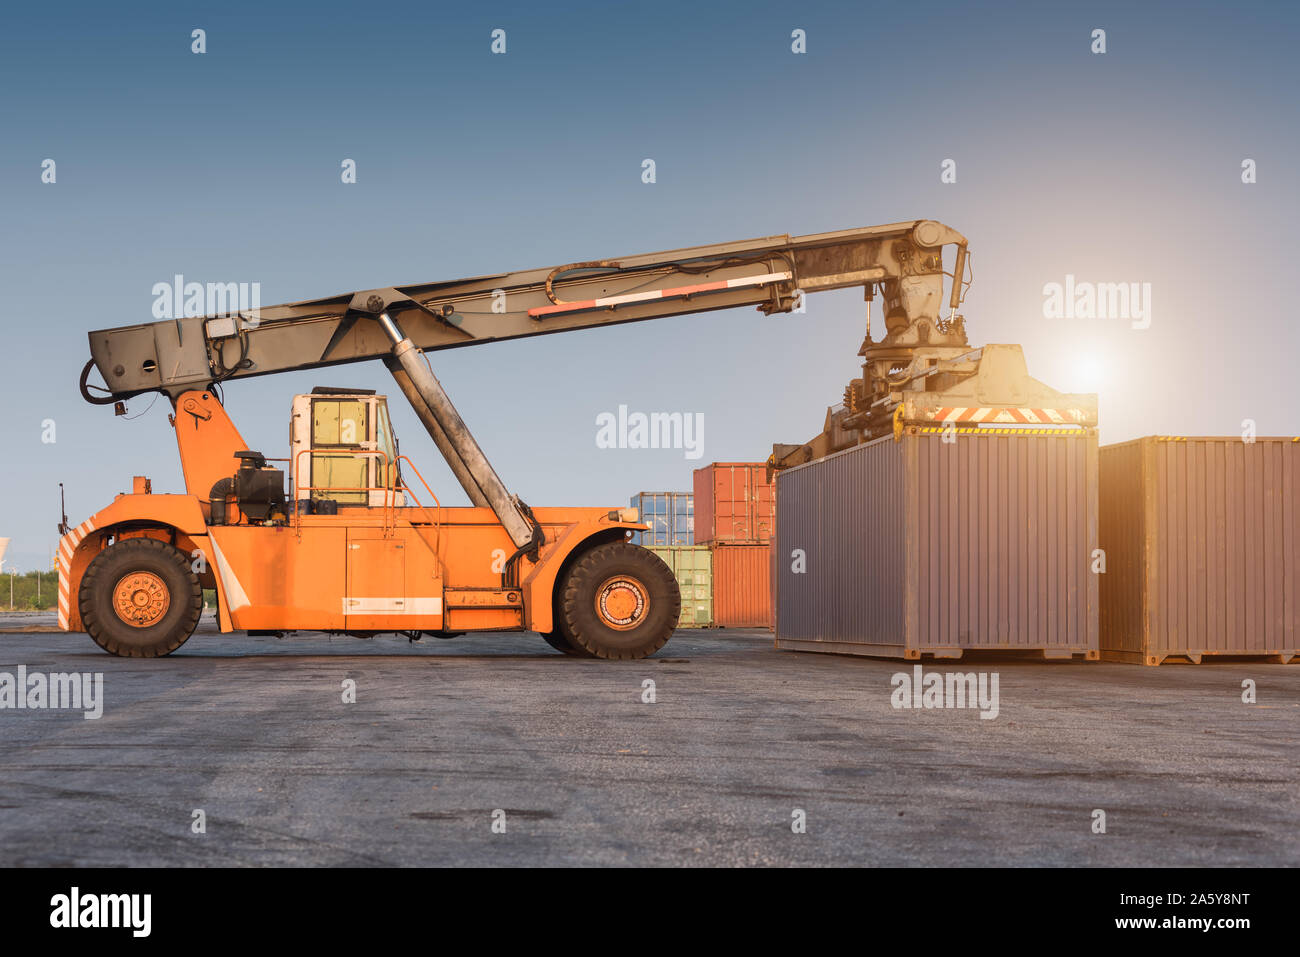 Forklift Handling Holding Container Box At Harbor Logistic Zone Stock Photo Alamy